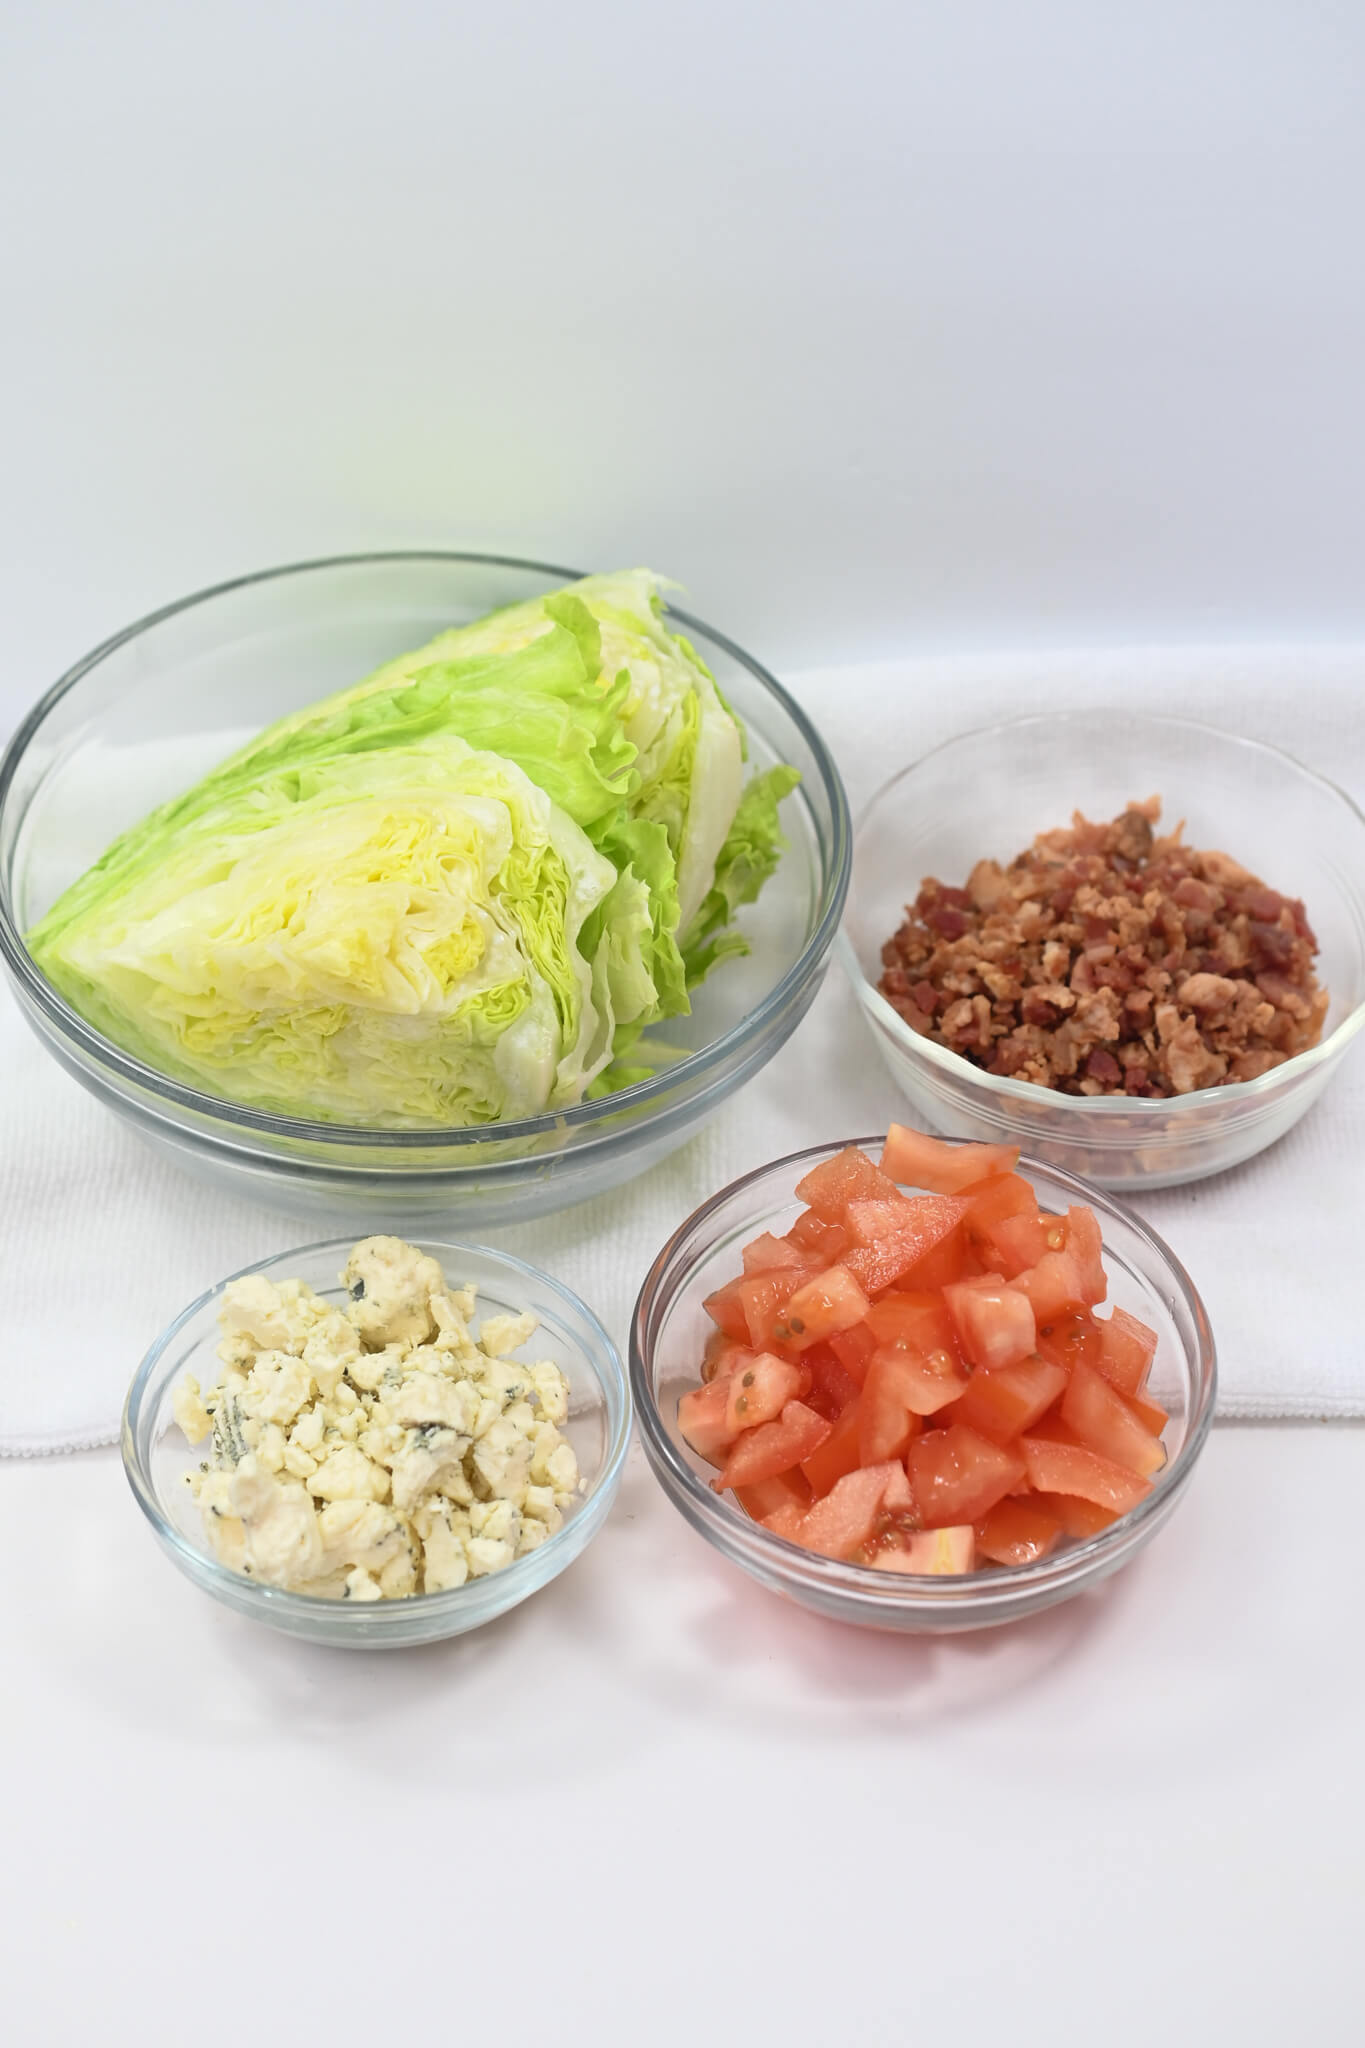  Lettuce, tomatoes, bacon, and cheese in a delightful bowl.